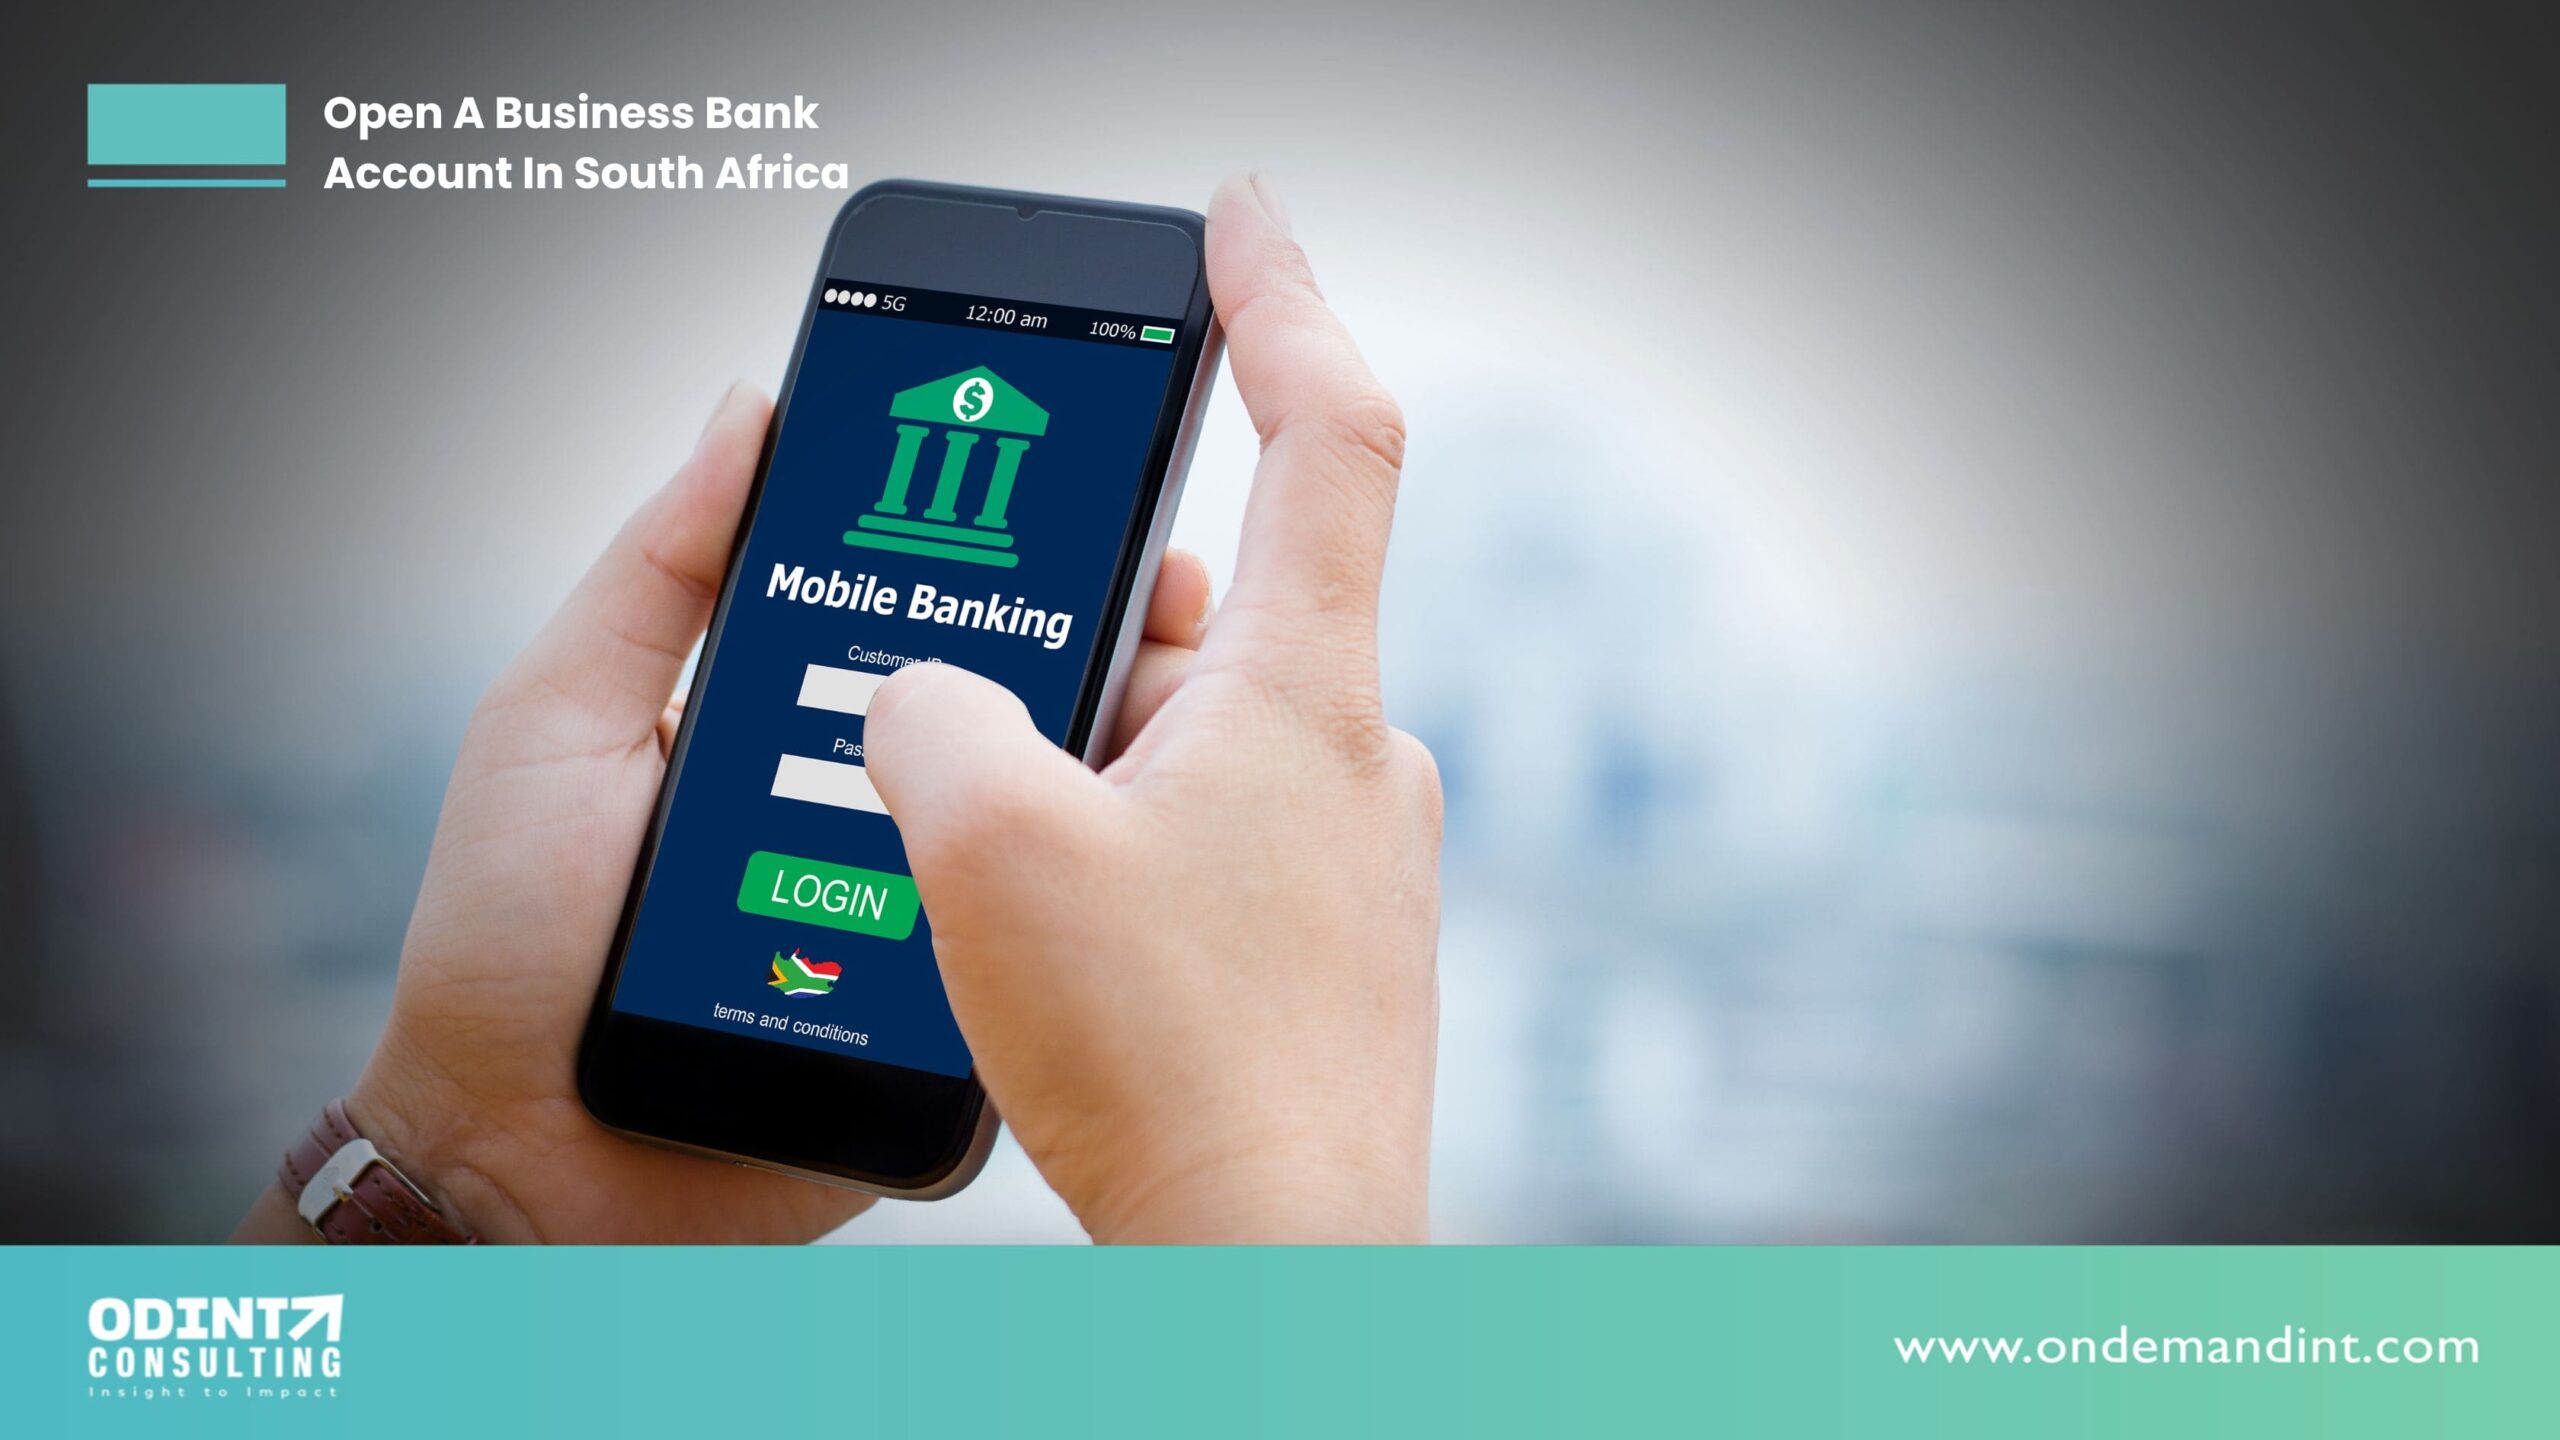 Open A Business Bank Account In South Africa: Process & Benefits